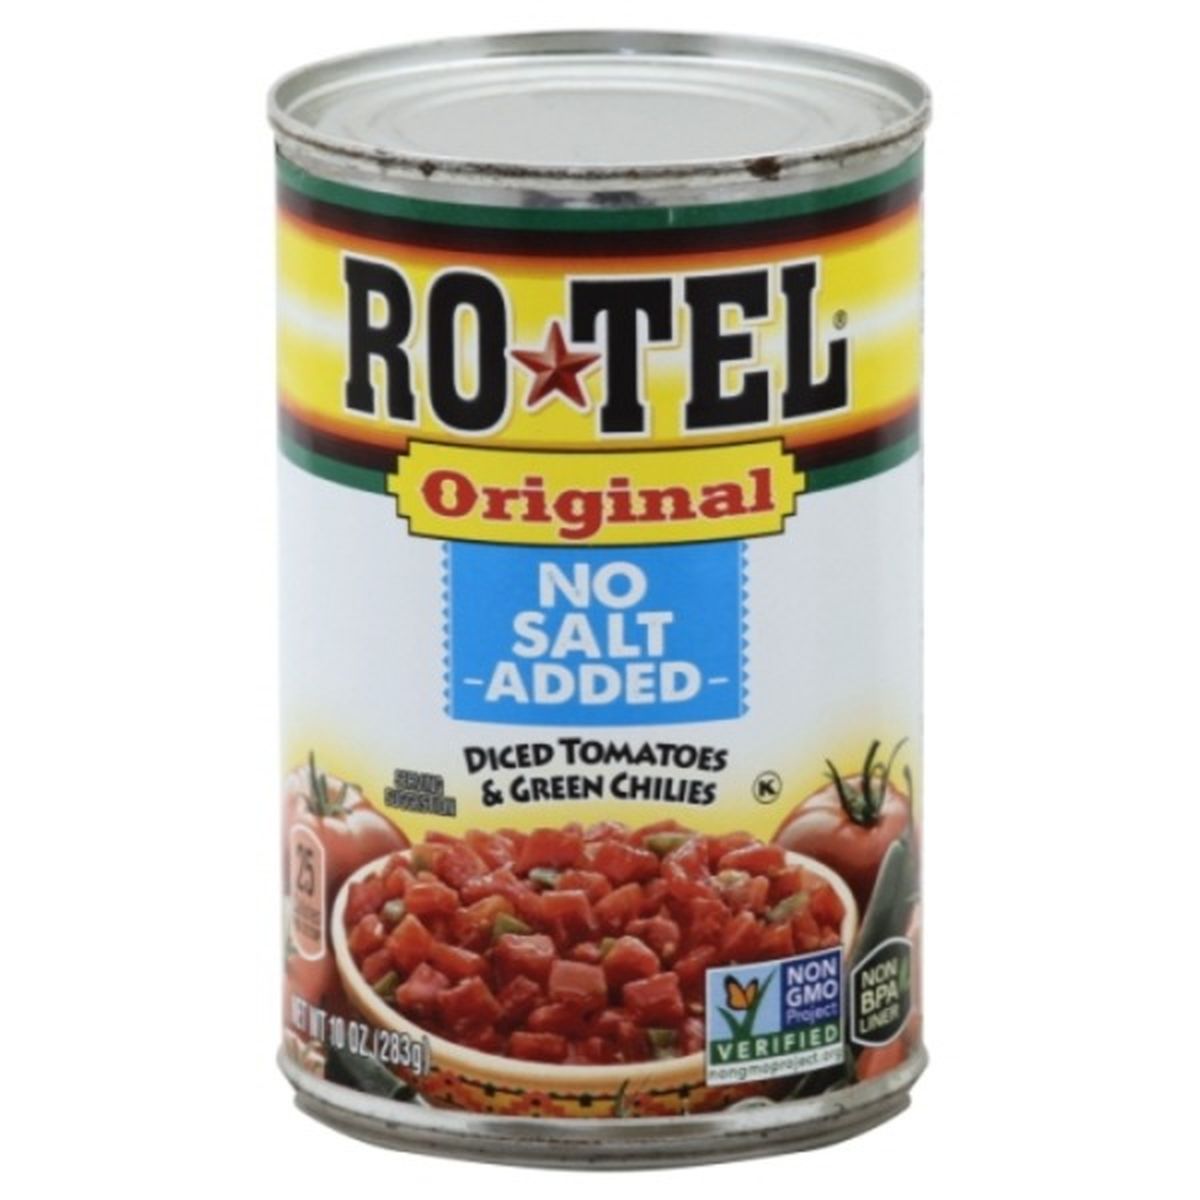 Calories in Ro-Tel Diced Tomatoes & Green Chilies, No Salt Added, Original